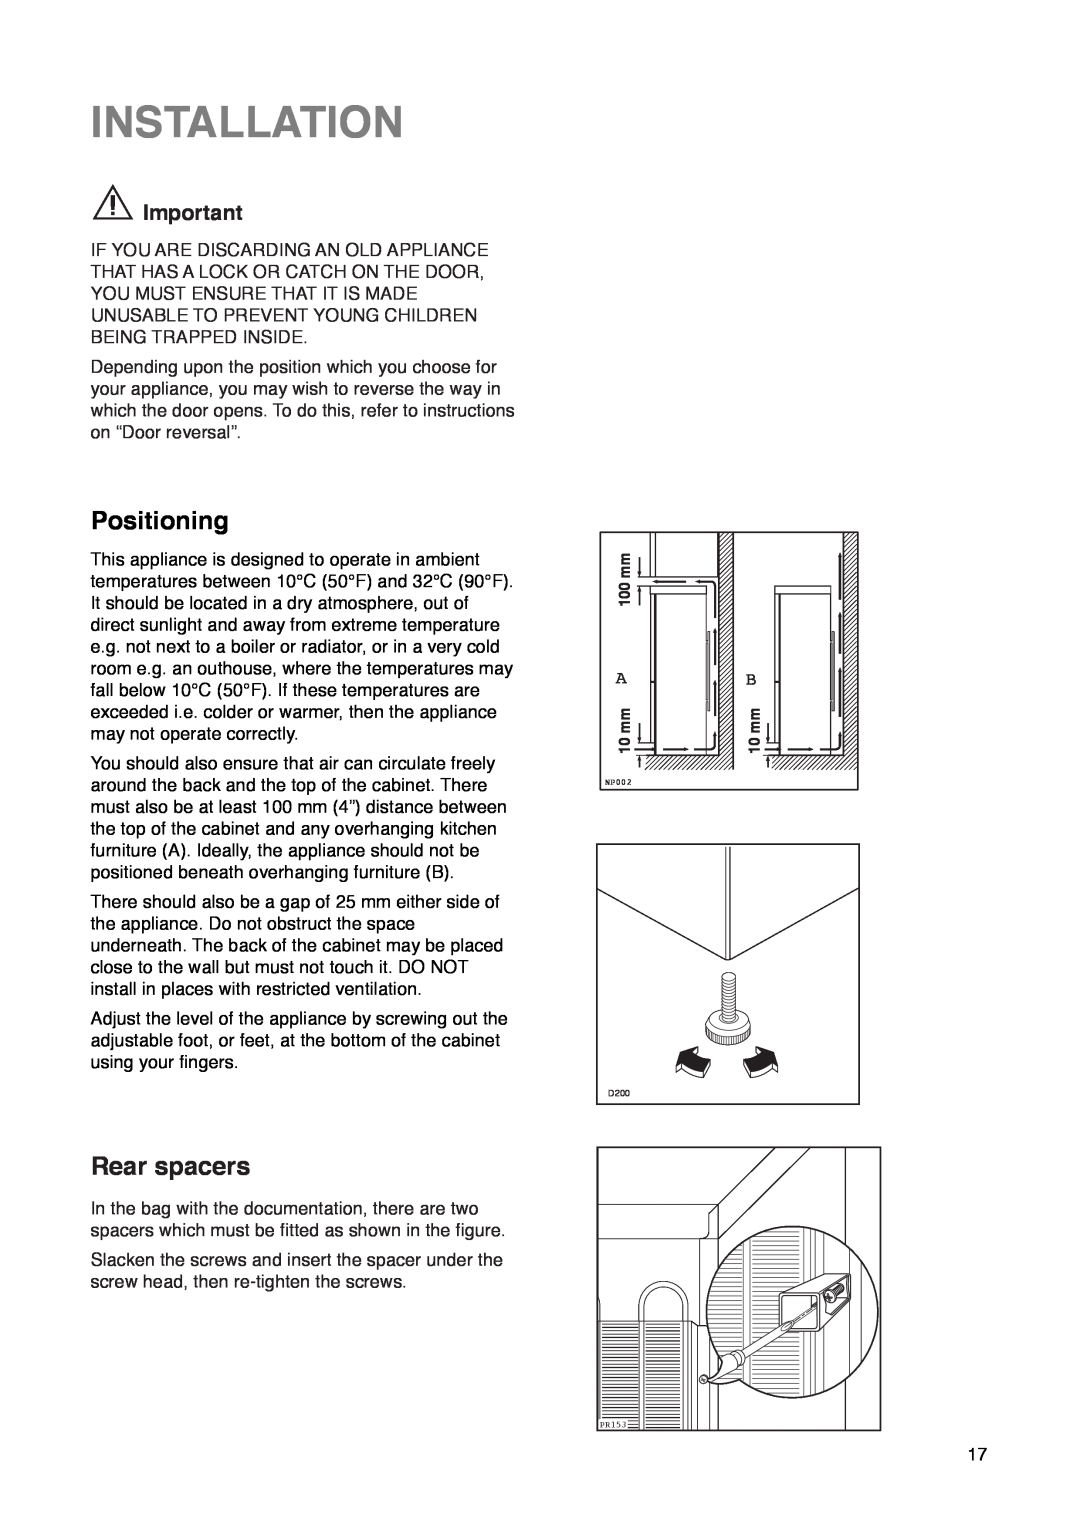 Zanussi ZK 60/30 RM manual Installation, Positioning, Rear spacers 